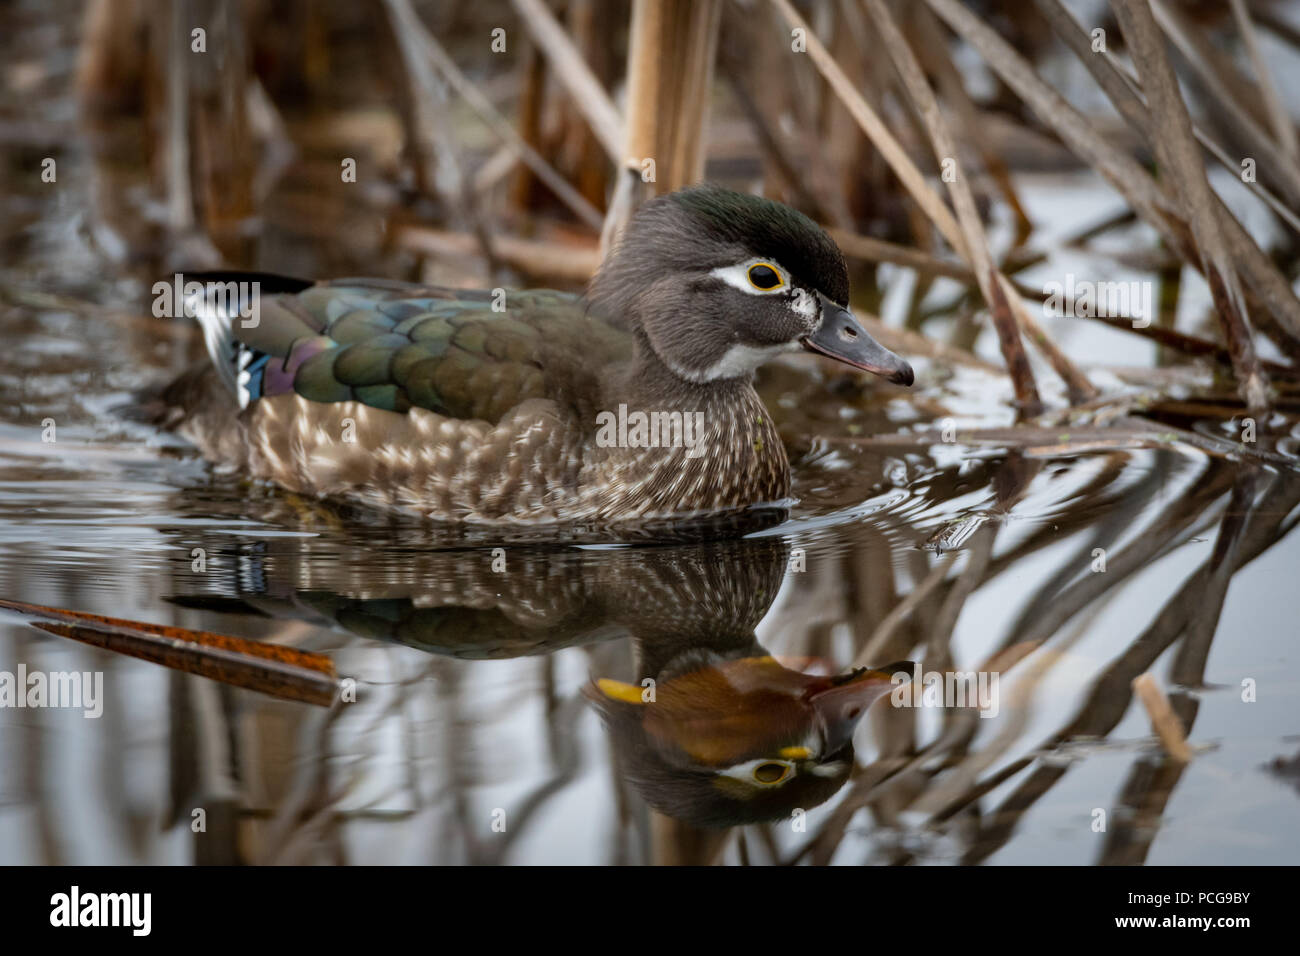 Female wood duck (Aix sponsa) reflected in the water as it swims past cattails in a marsh. Stock Photo